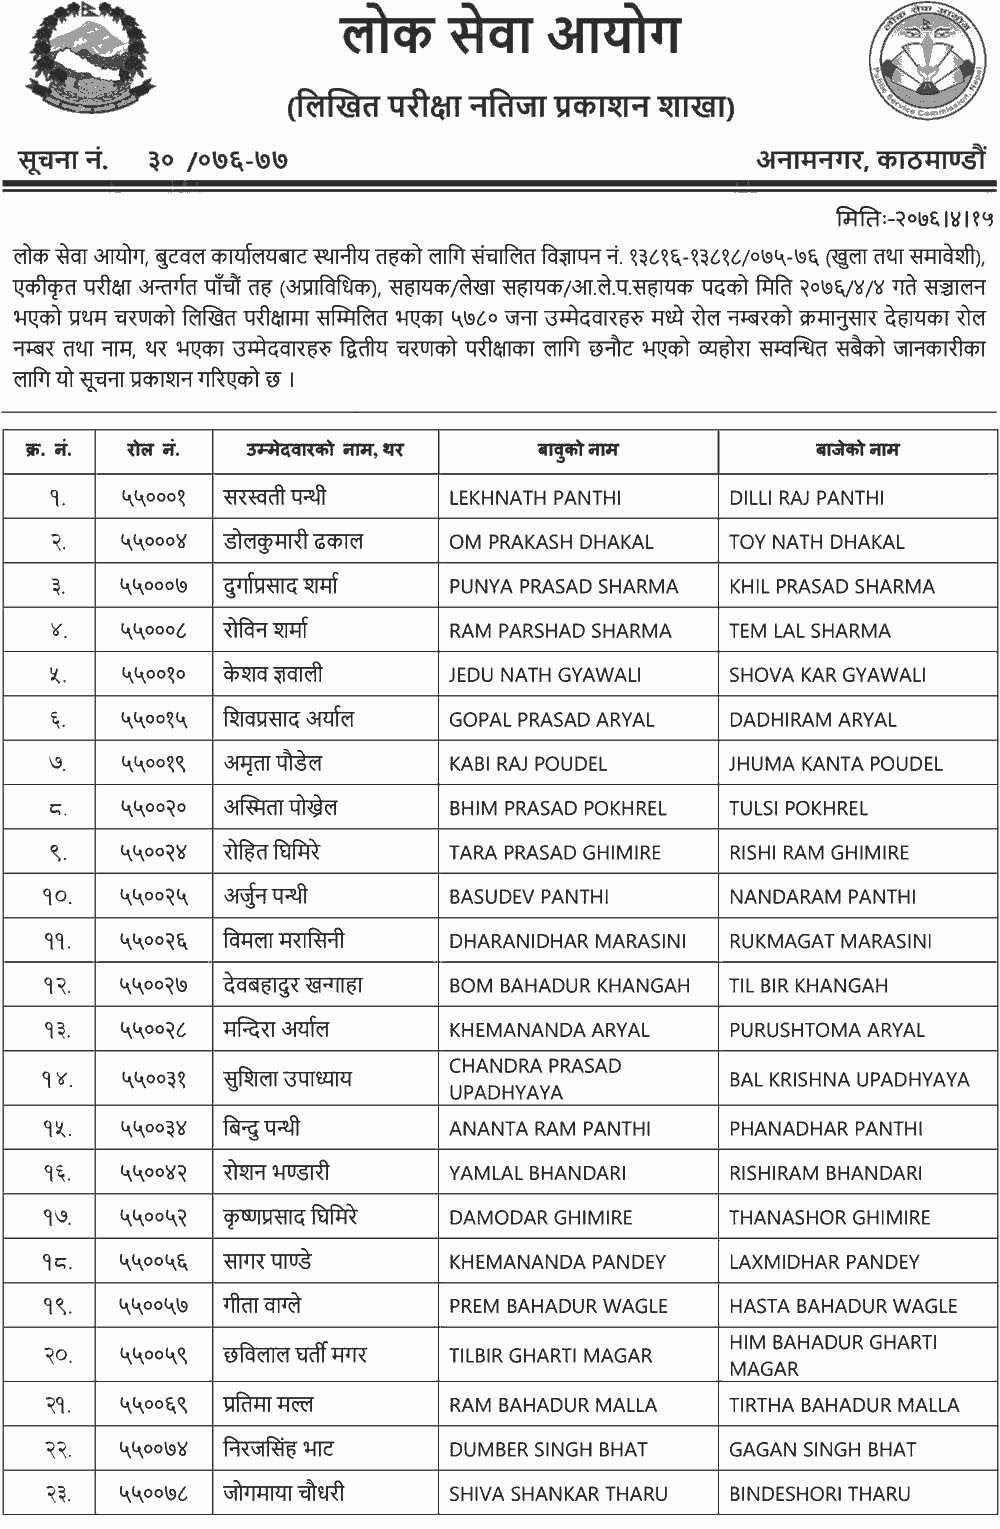 Local Level 5th Level Non-Technical Written Exam Result - Butwal